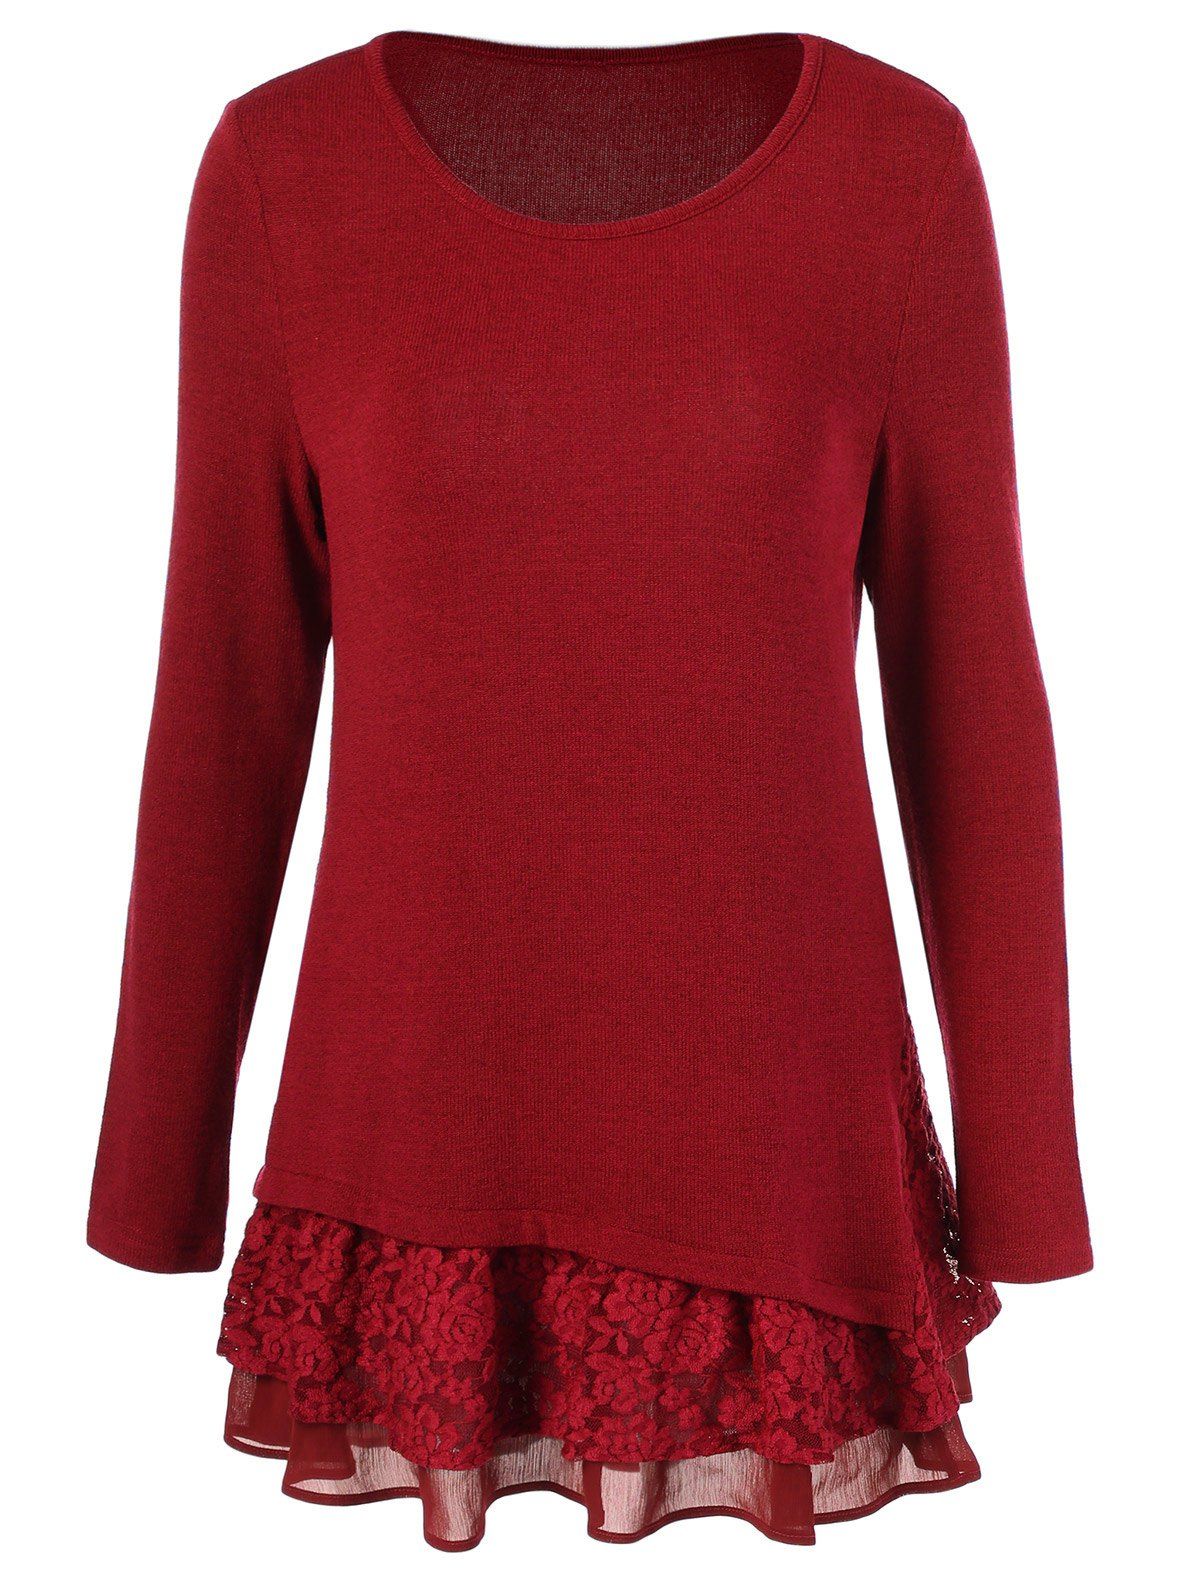 [41% OFF] 2021 Long Sleeve Floral Lace Trim T-Shirt In RED | DressLily